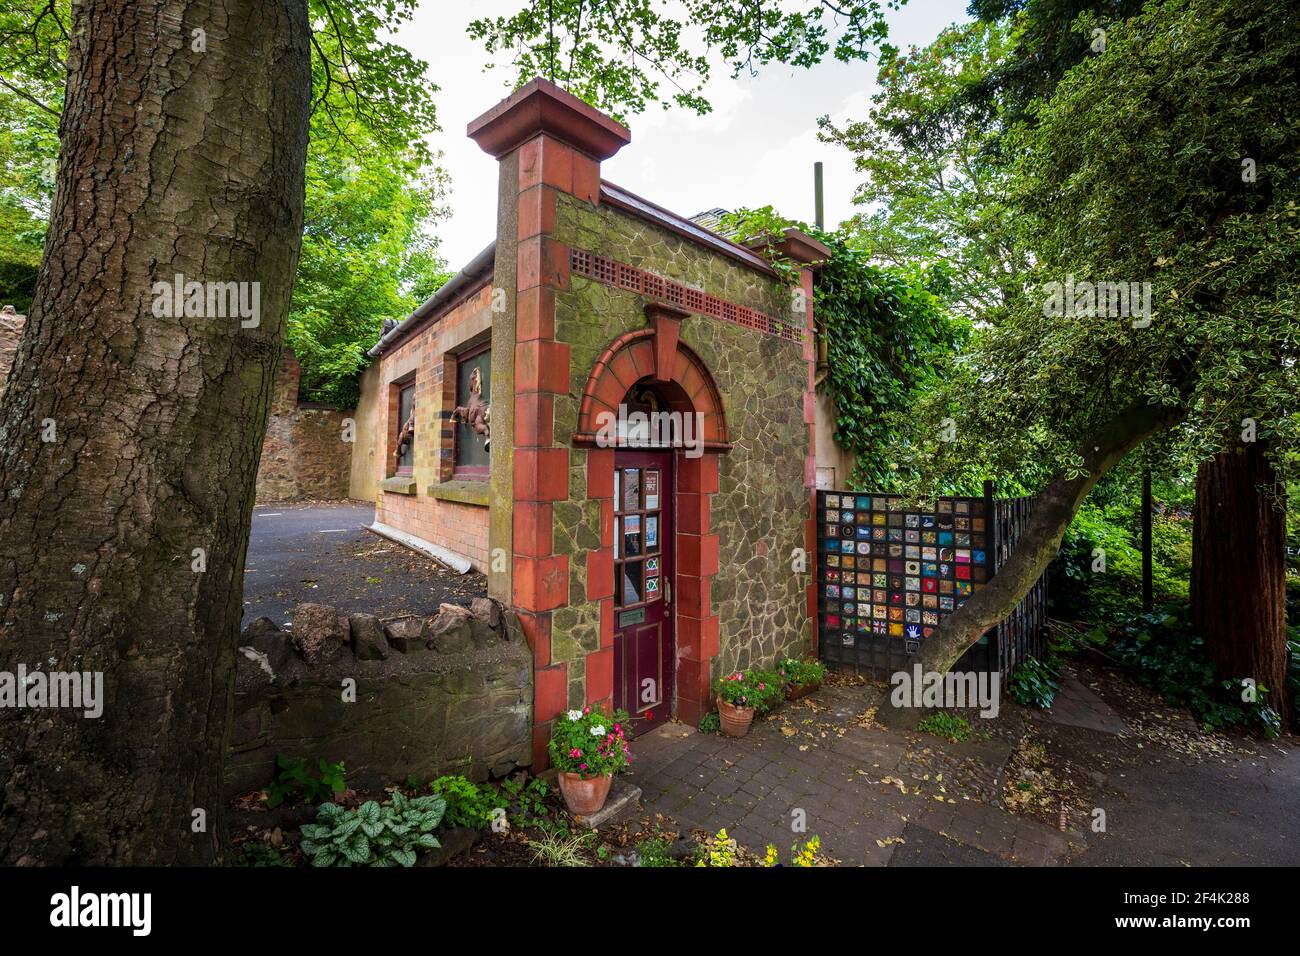 The 'Theatre of Small Convenience' in Edith Walk, Great Malvern, Worcestershire, England Stock Photo